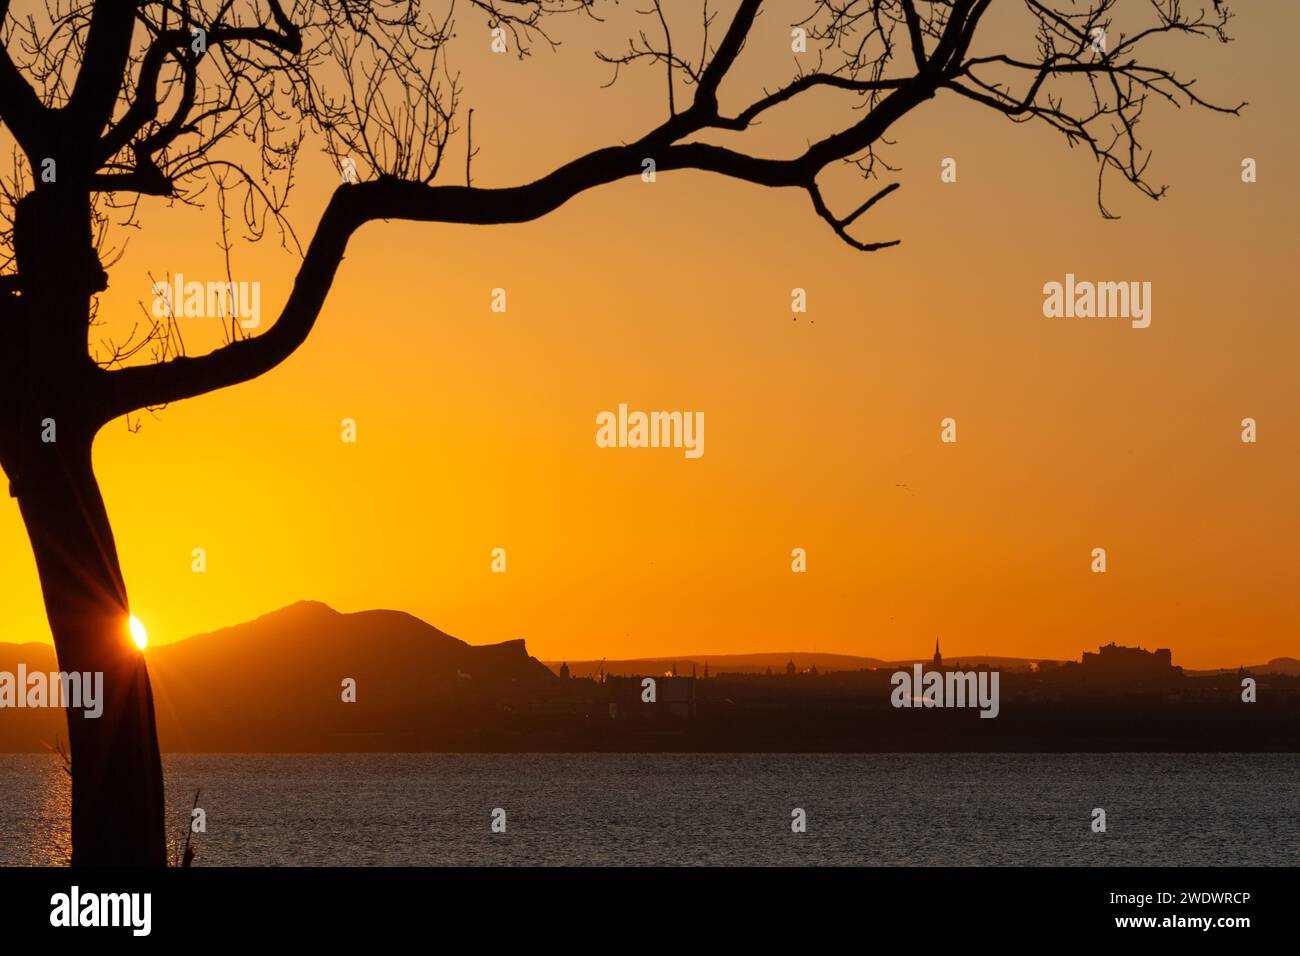 A beautiful sunrise silhouetting a single tree with Edinburgh and Arthurs Seat in the background Stock Photo